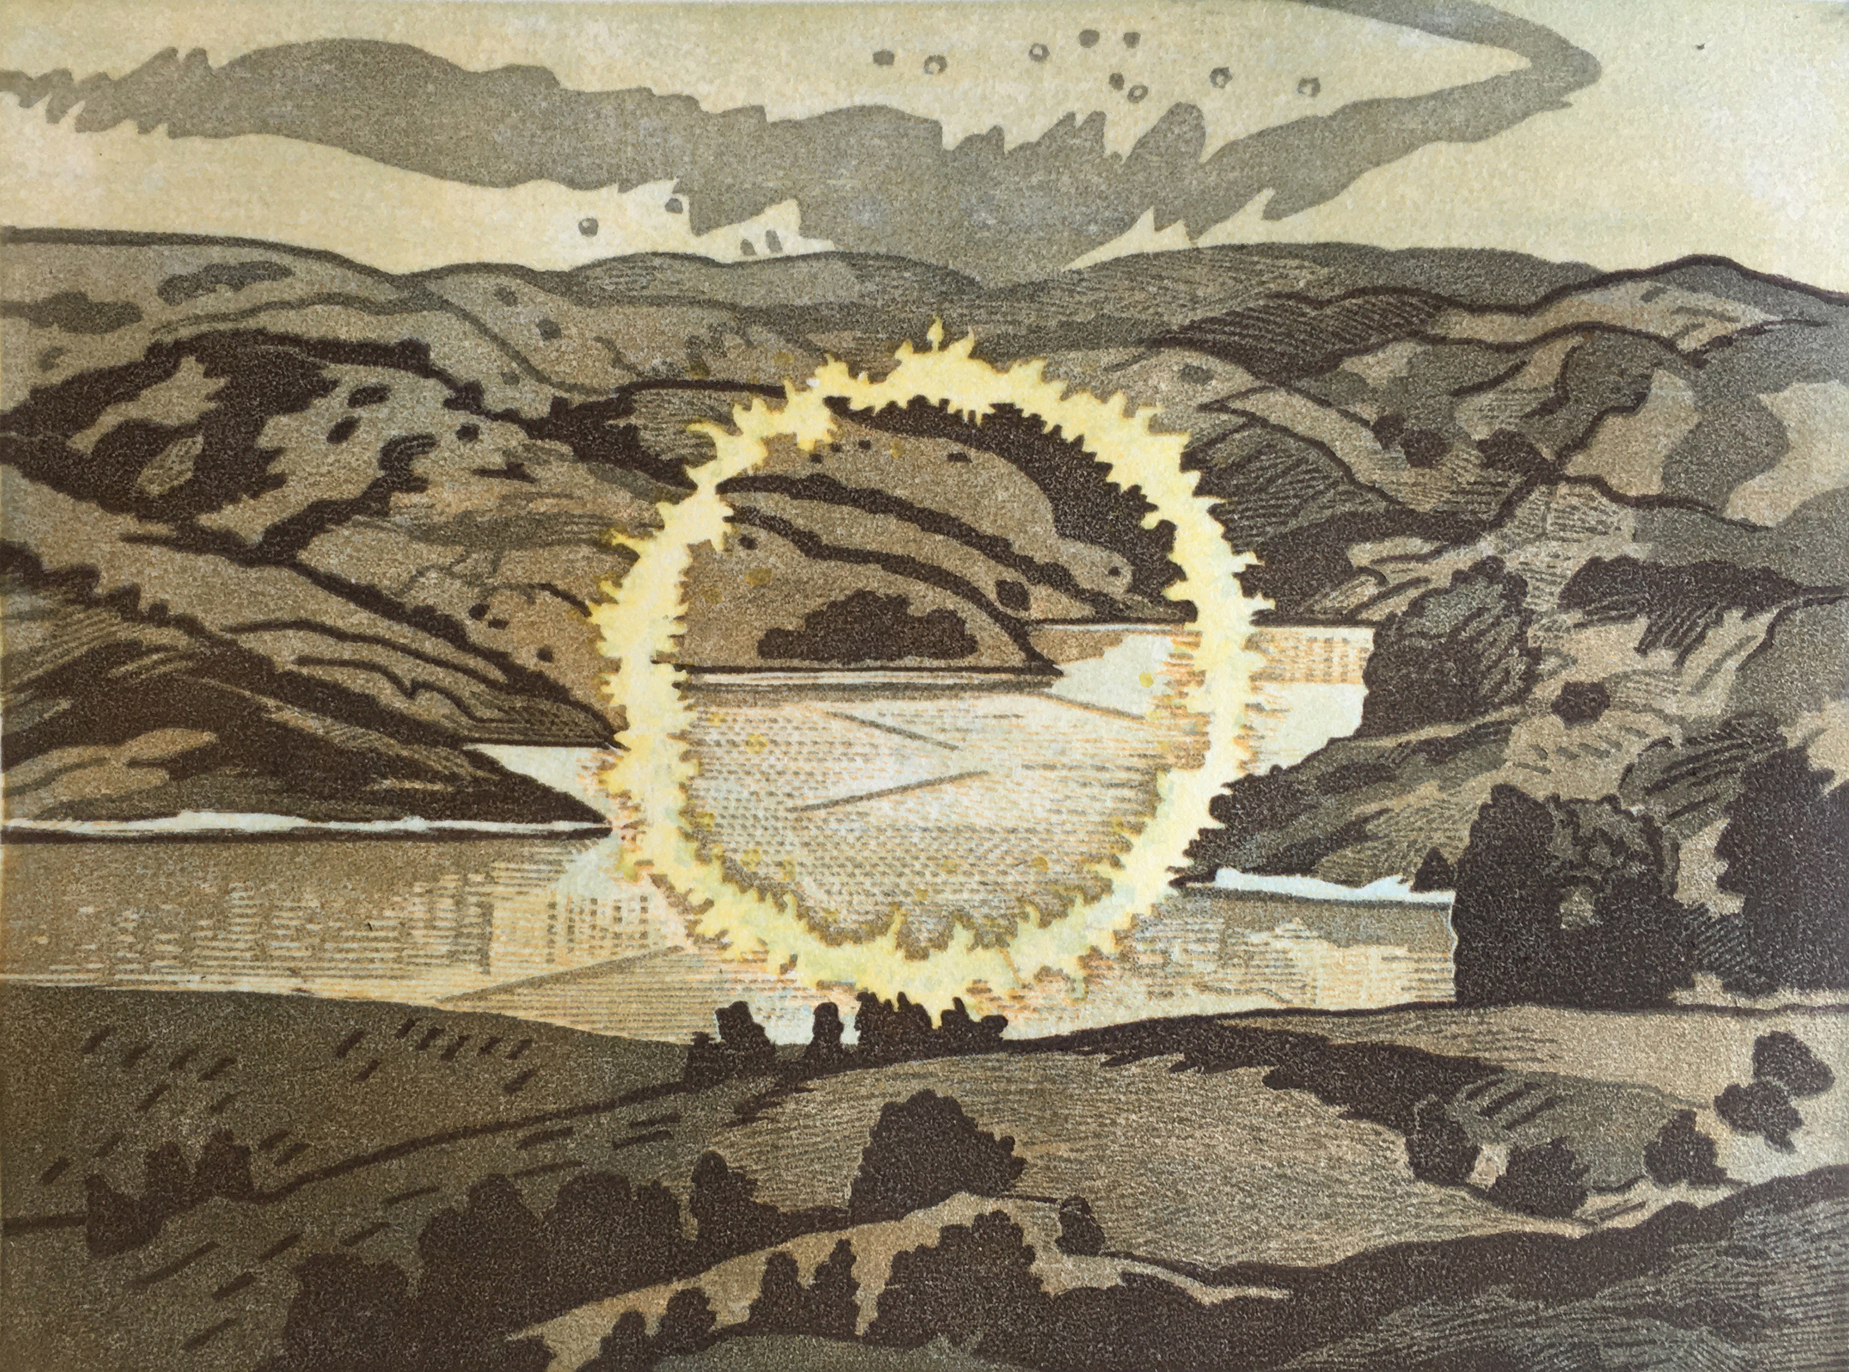 Donna Westerman, Ring of Fire at Briones, multiple block reduction woodcut, 9 x 12 in, 2020